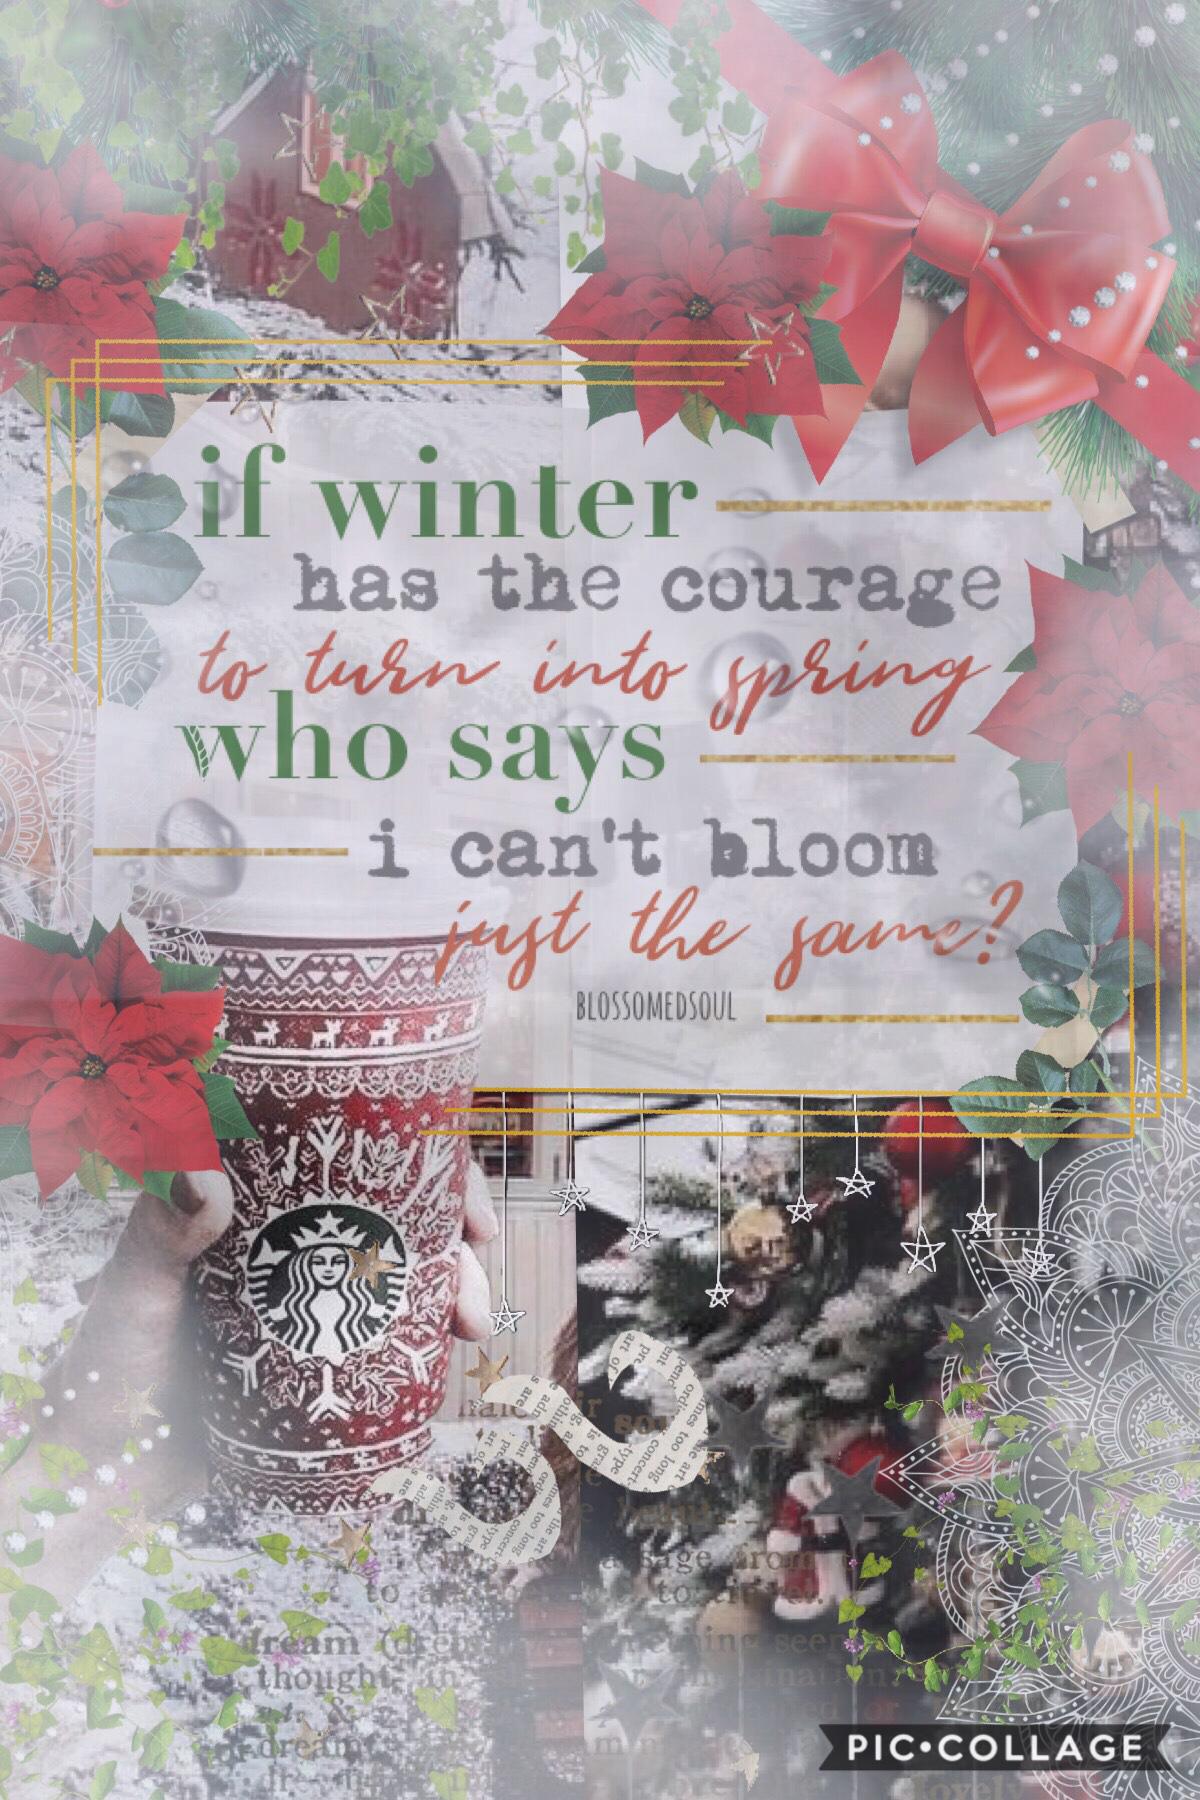 t a p

yes i know it’s way too early for a christmas collage but i couldn’t resist 😂 qotd: how was your thanksgiving? 🍁